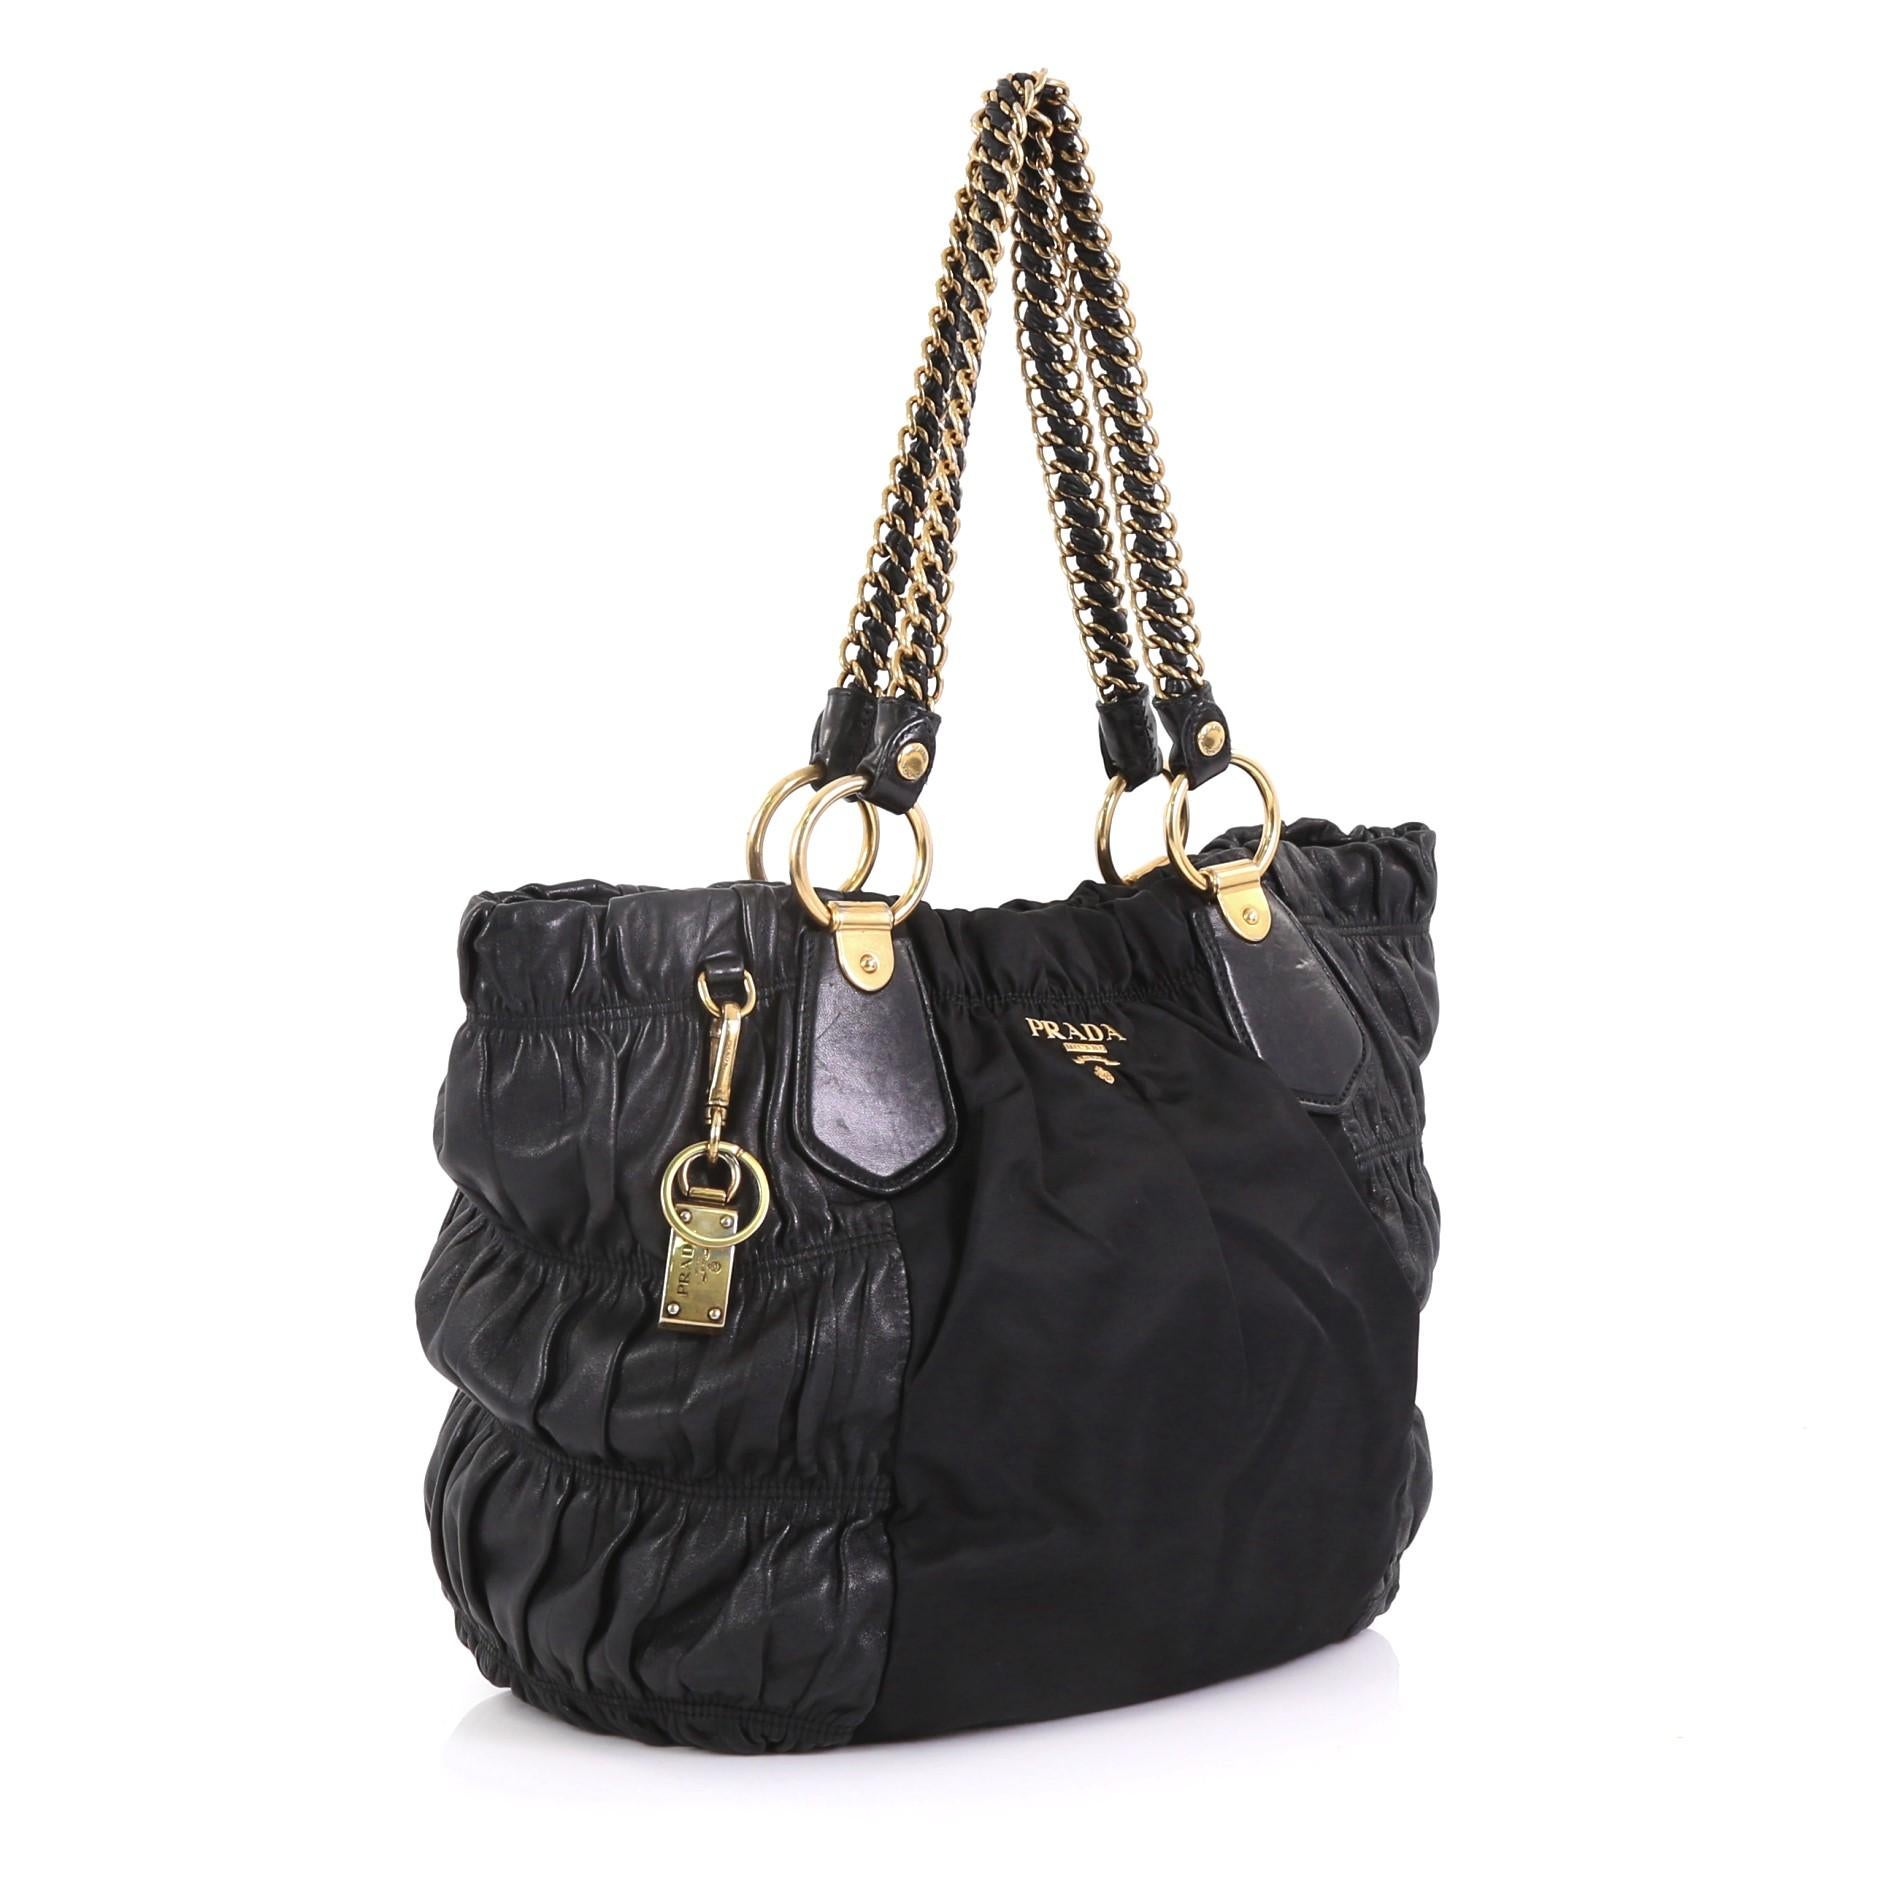 This Prada Lux Chain Strap Gaufre Tote Leather and Tessuto Large, crafted in black leather and tessuto, features dual woven-in leather chain straps, Prada logo and gold-tone hardware. Its snap button closure opens to a black fabric interior with zip